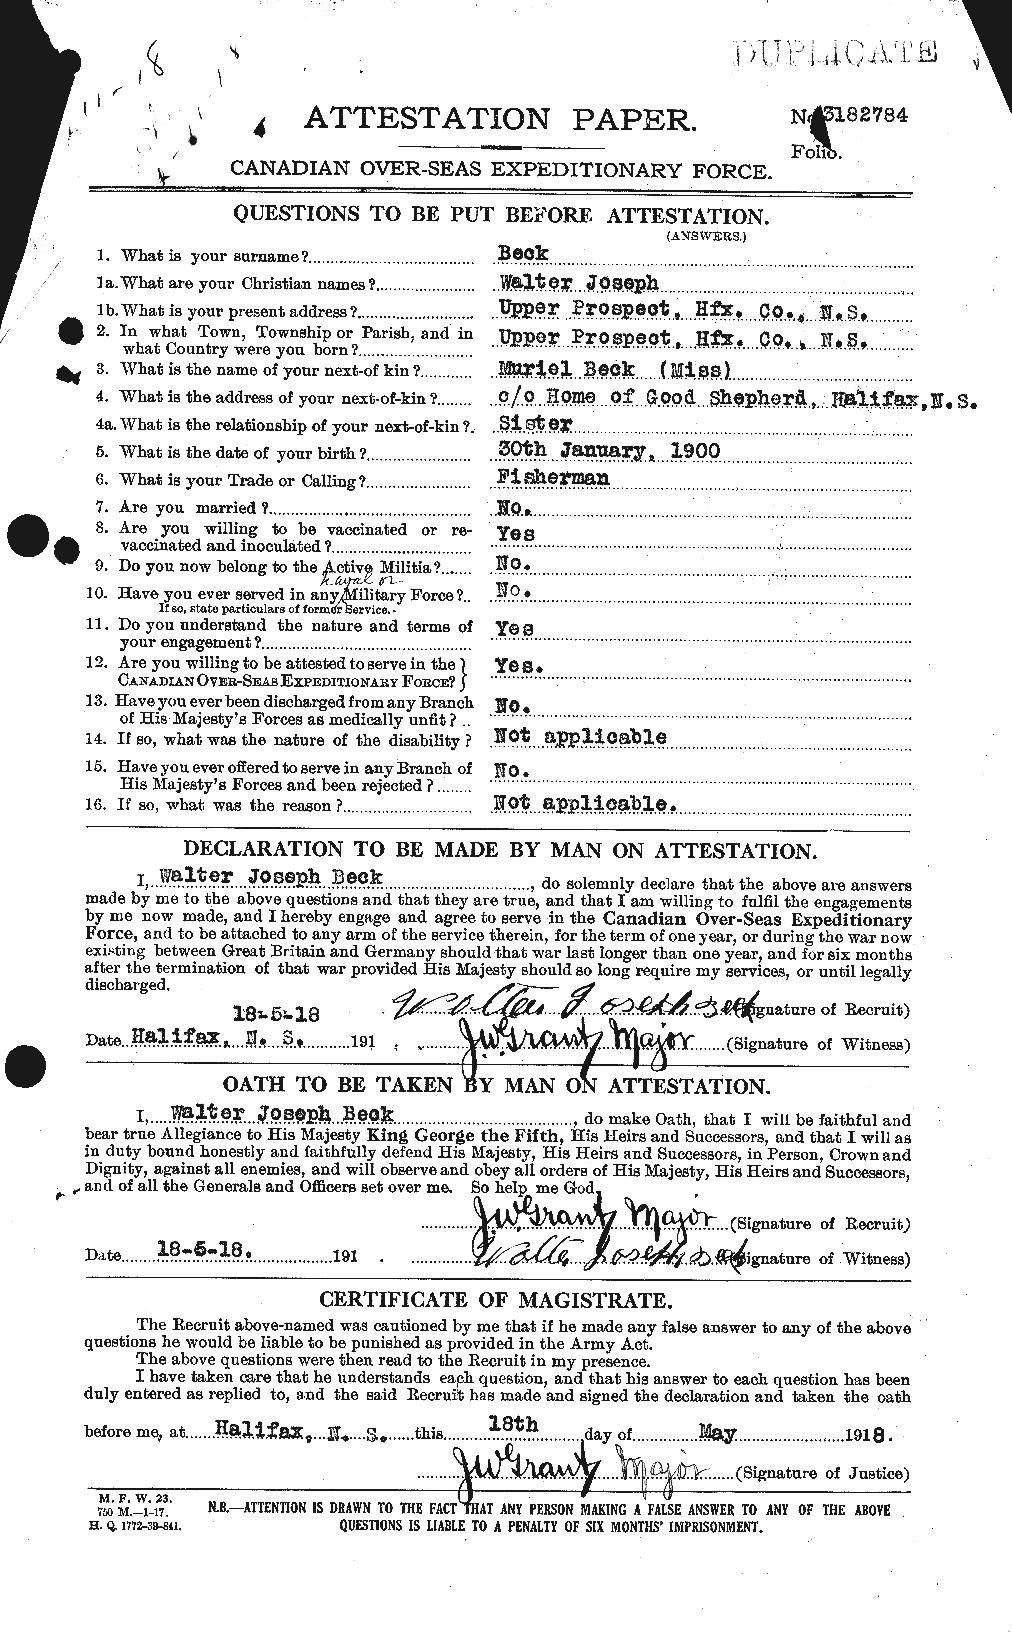 Personnel Records of the First World War - CEF 232236a